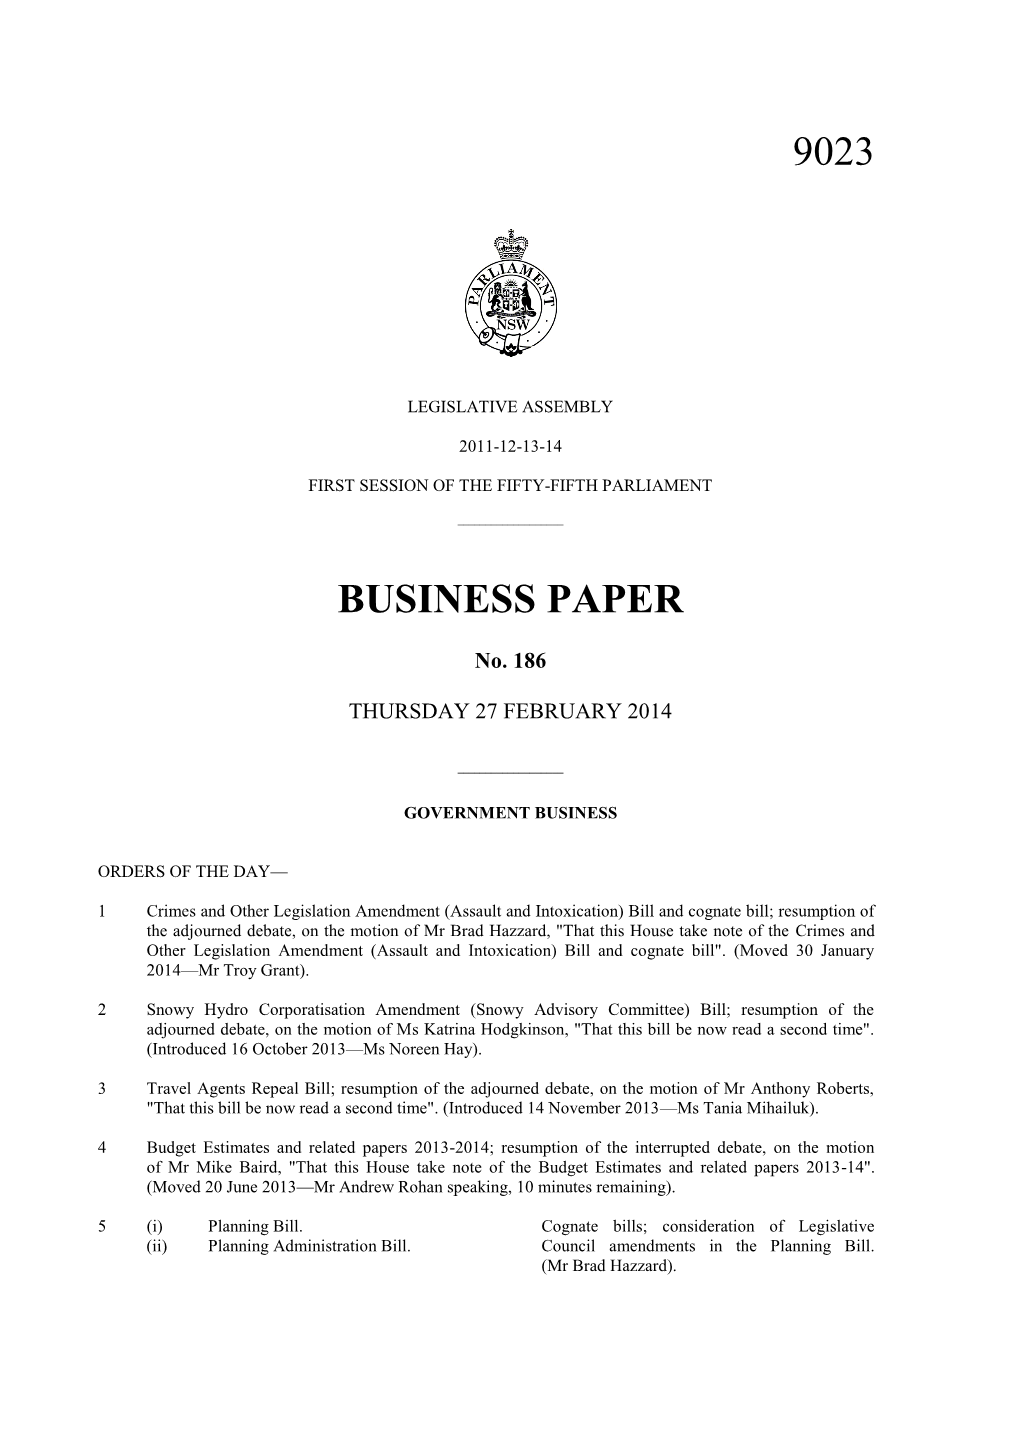 9023 Business Paper